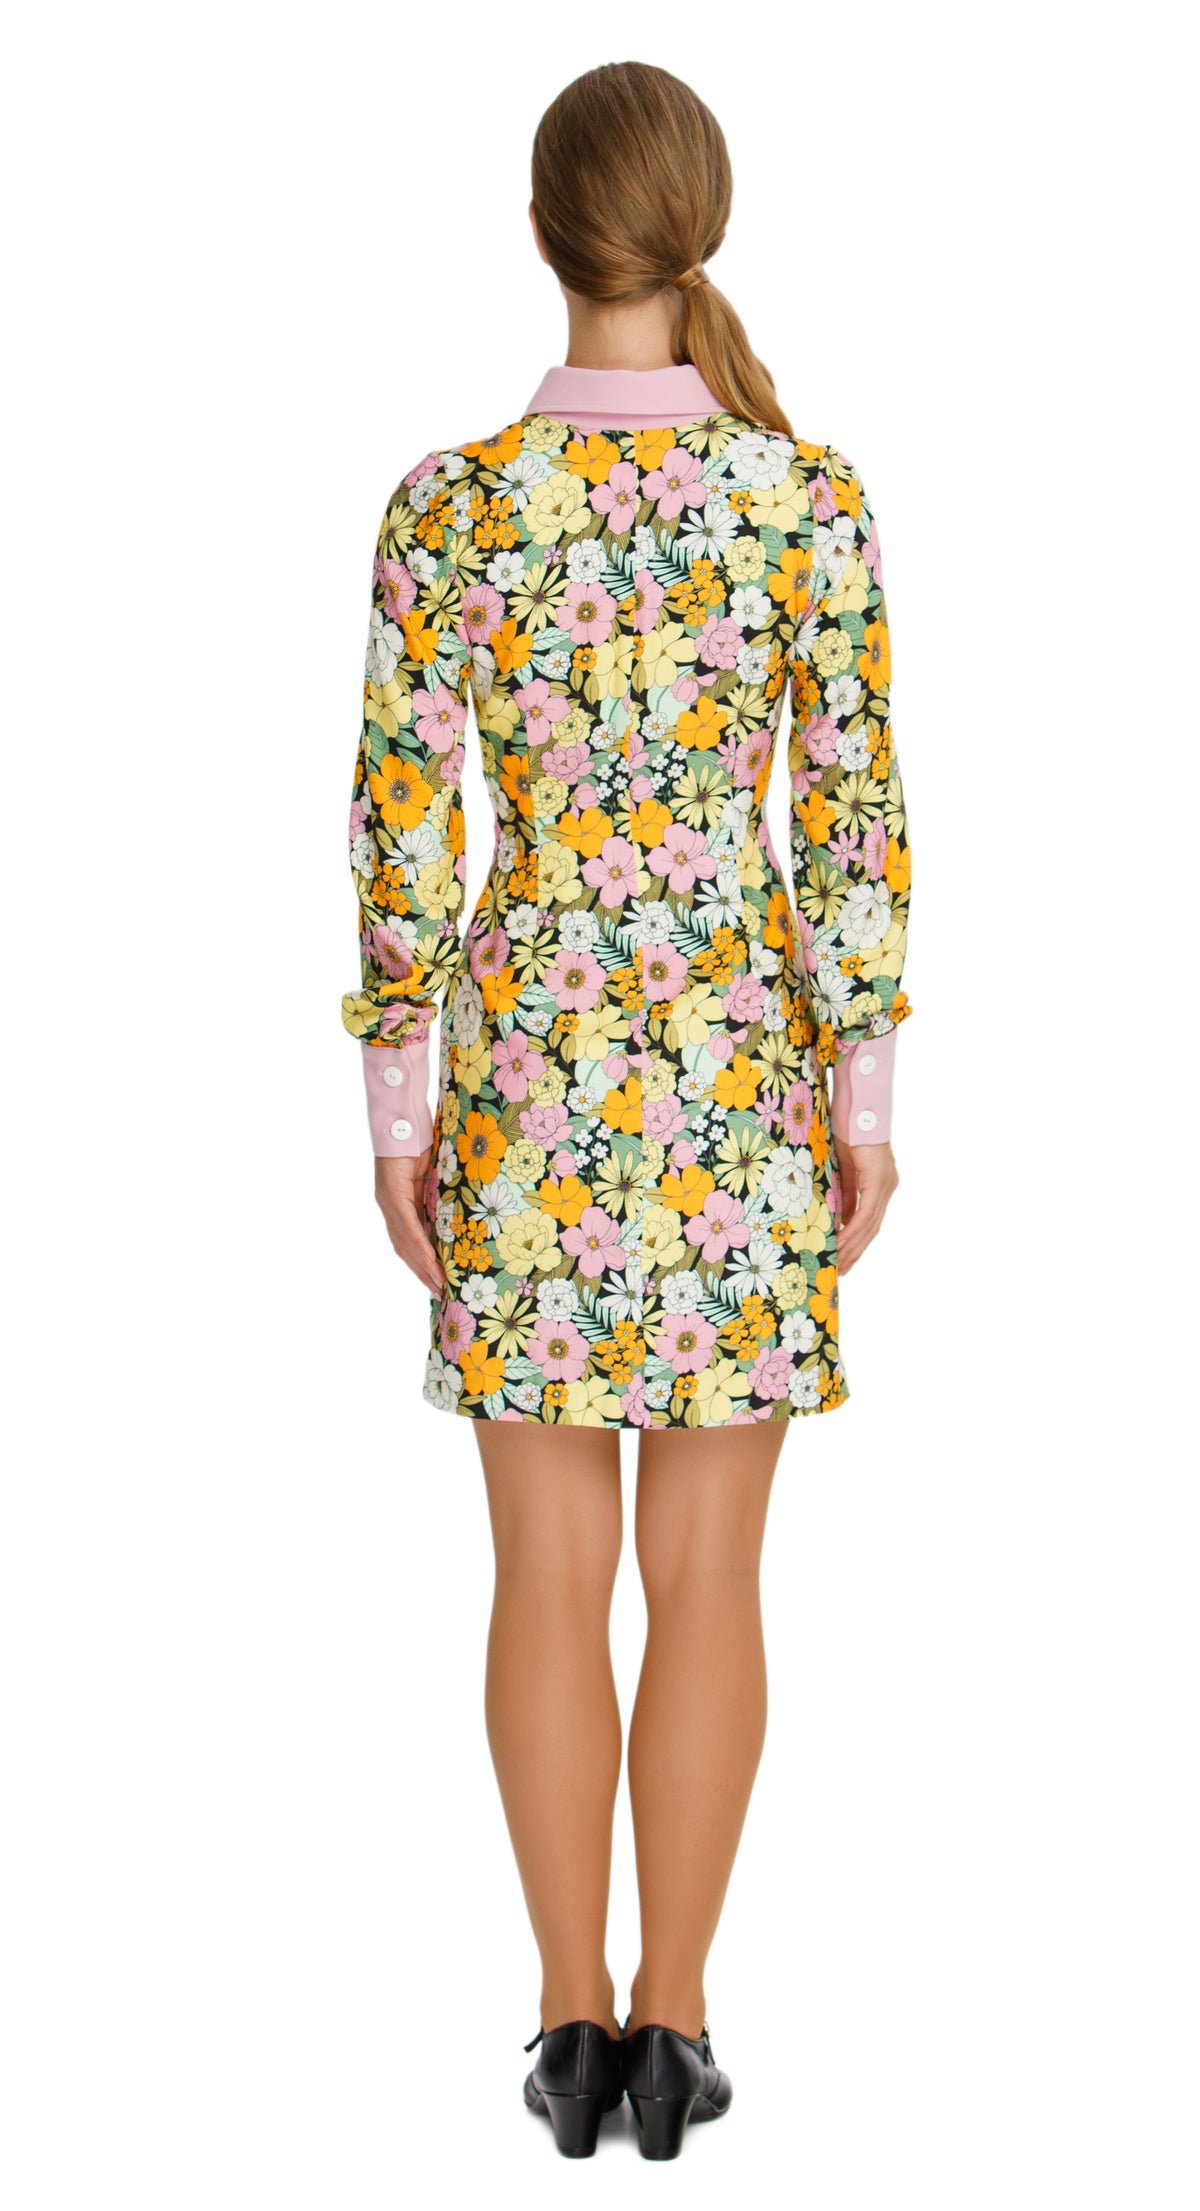 Vibrant Floral Autumn Shirt Dress with Pink Collar and Cuffs